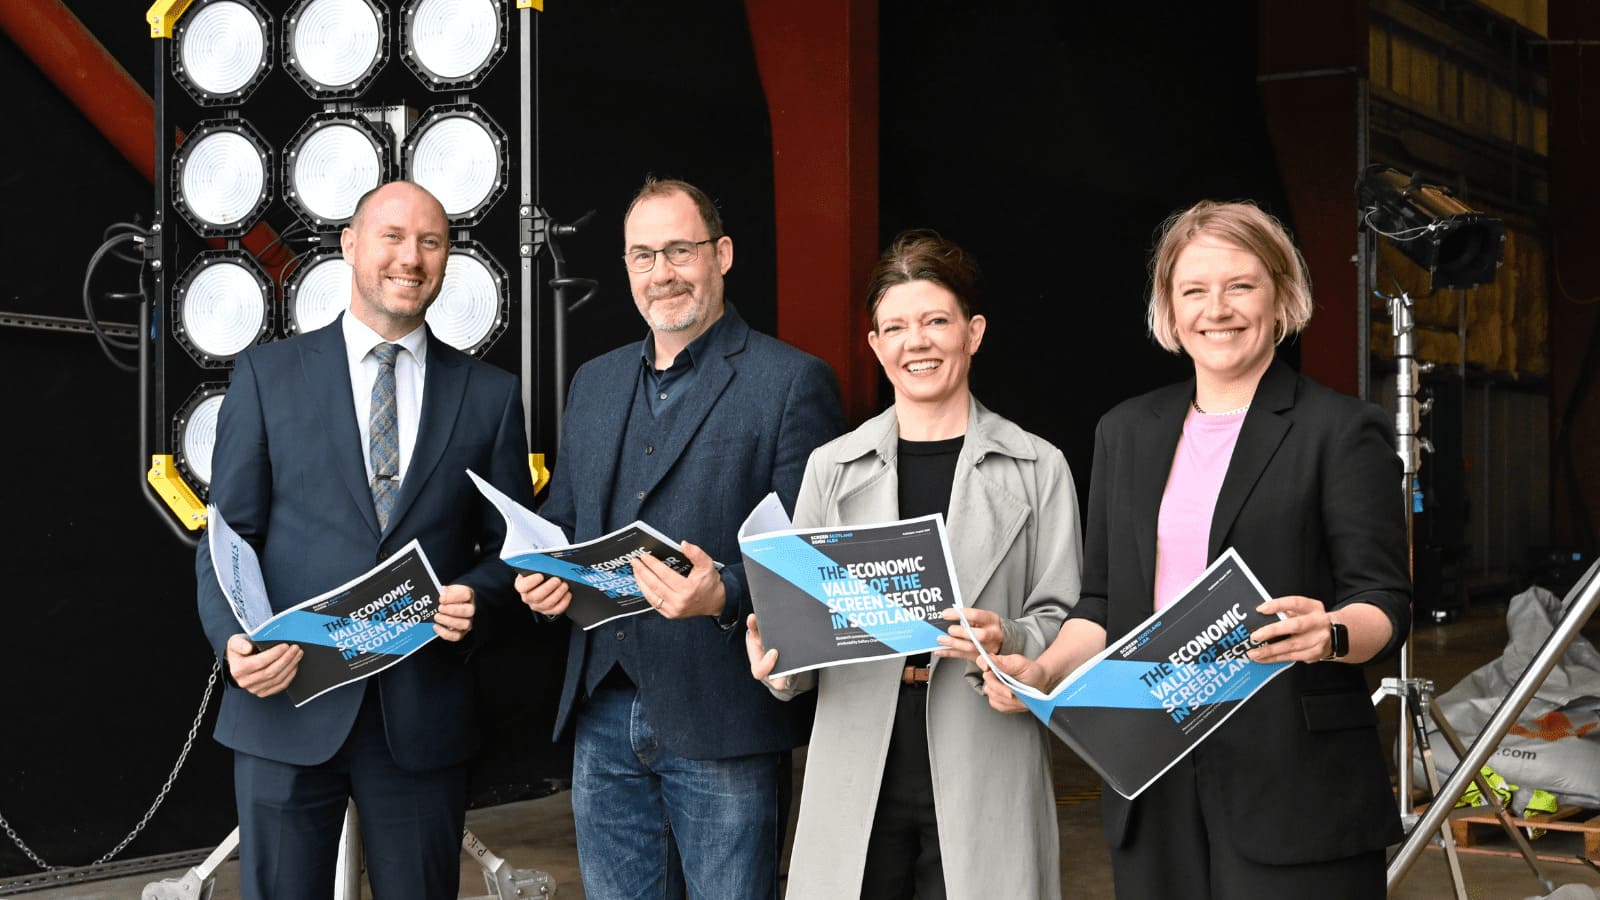 Isabel Davis (Exexcutive Director of Screen Scotland), Wellbeing Economy Secretary Neil Gray, Daisy Mount (Prime Video's Development Executive), and David Smith (Director of Screen Scotland) standing holding the economic impact report